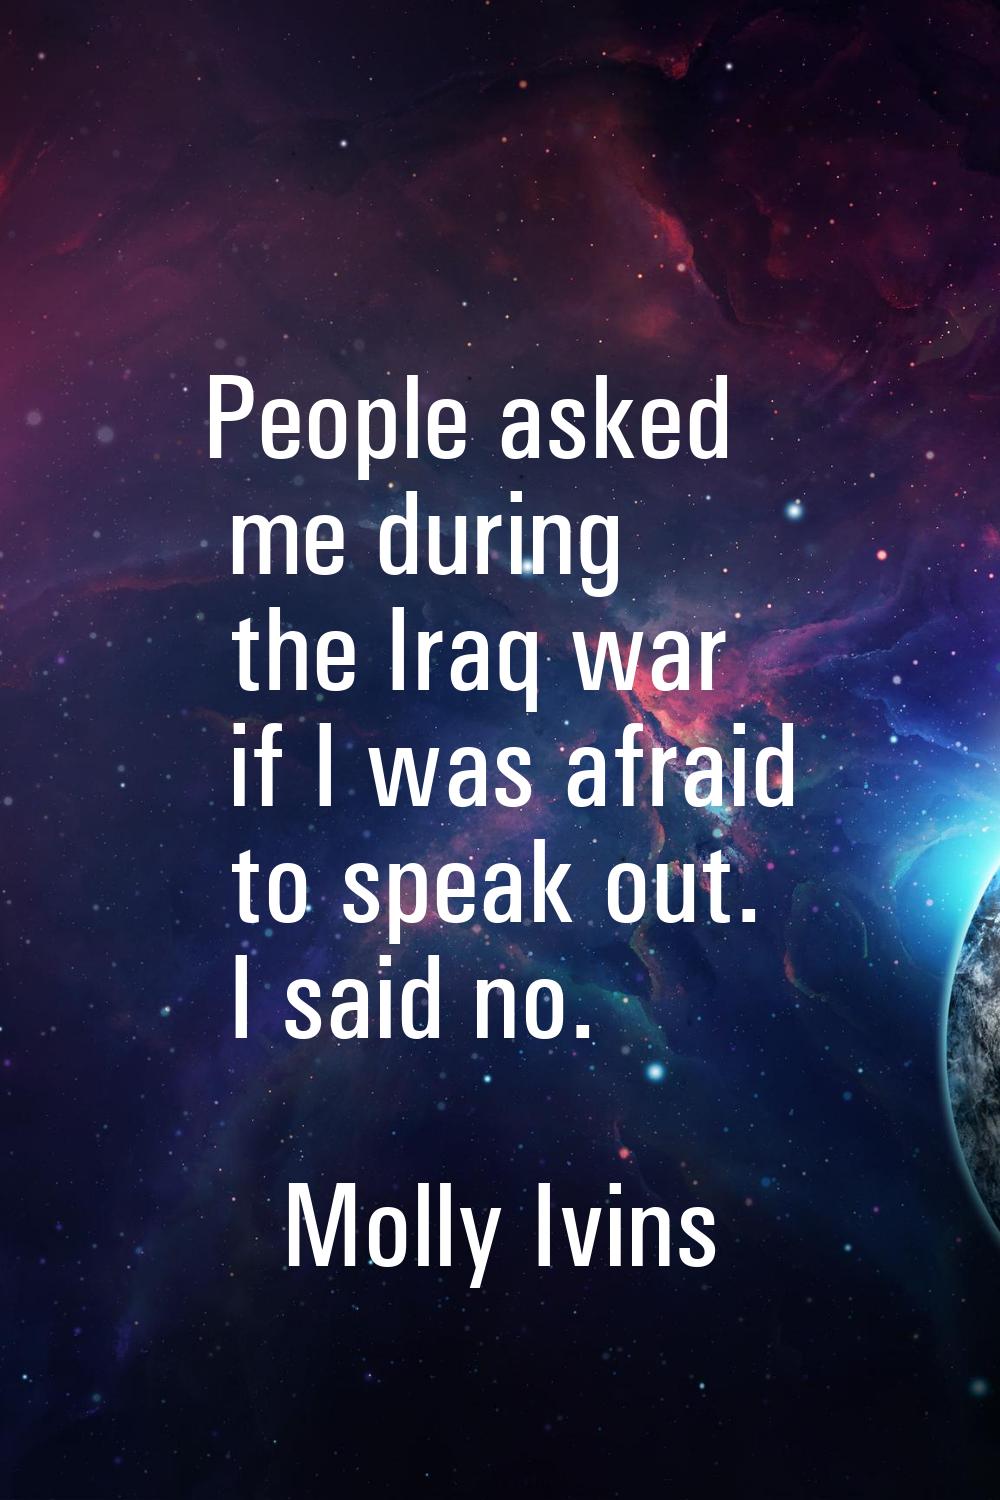 People asked me during the Iraq war if I was afraid to speak out. I said no.